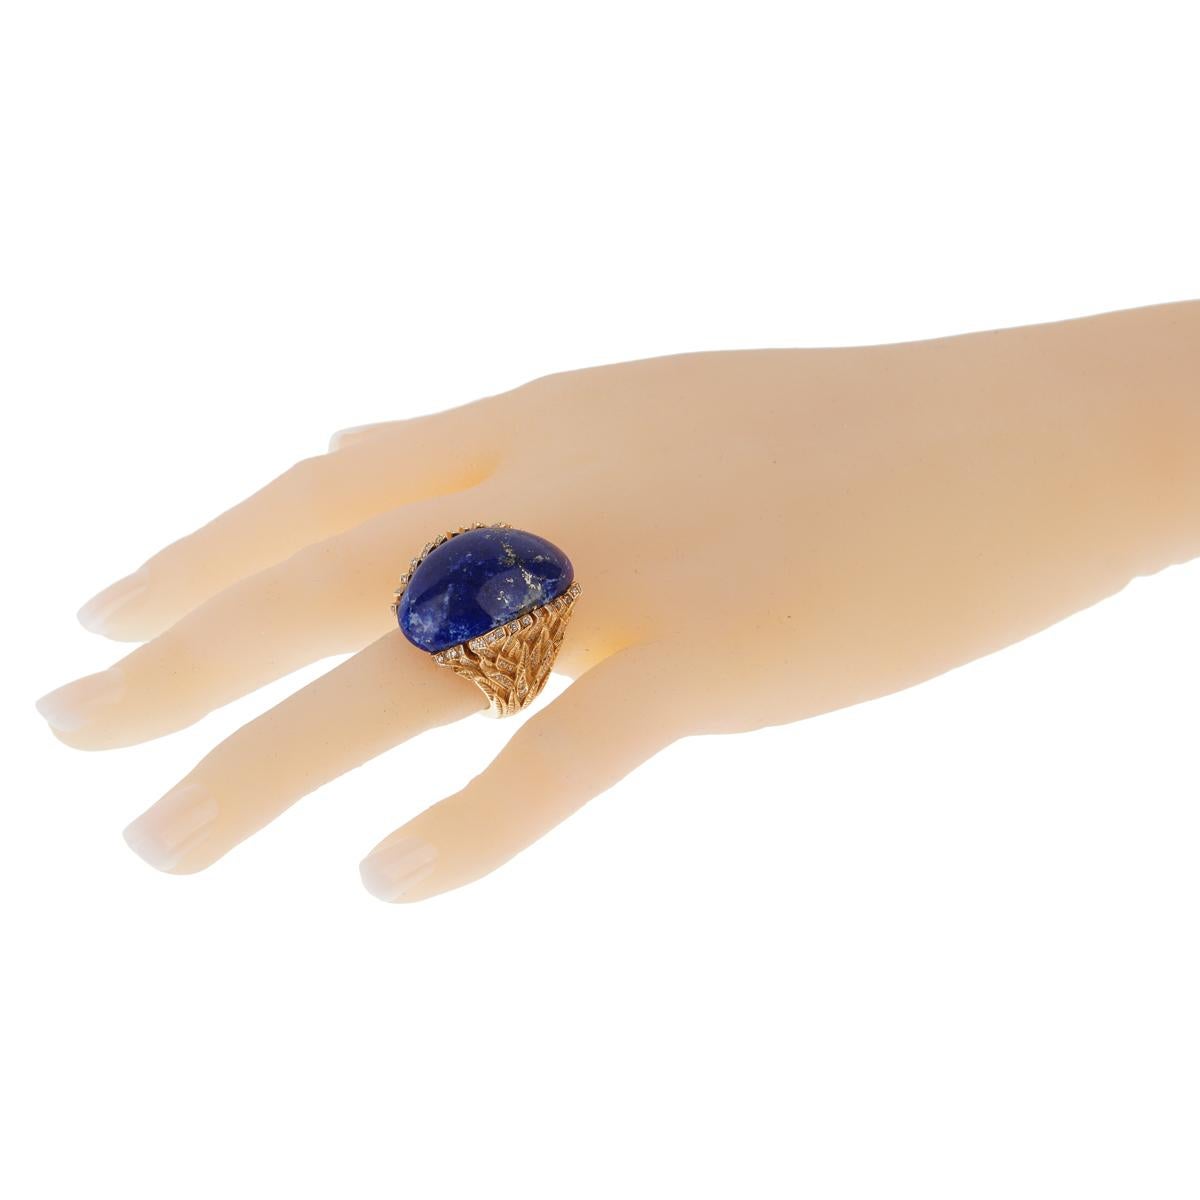 A magnificent custom piece by Rodney Rayner featuring a Lapis Lazuli central stone measuring 1.25